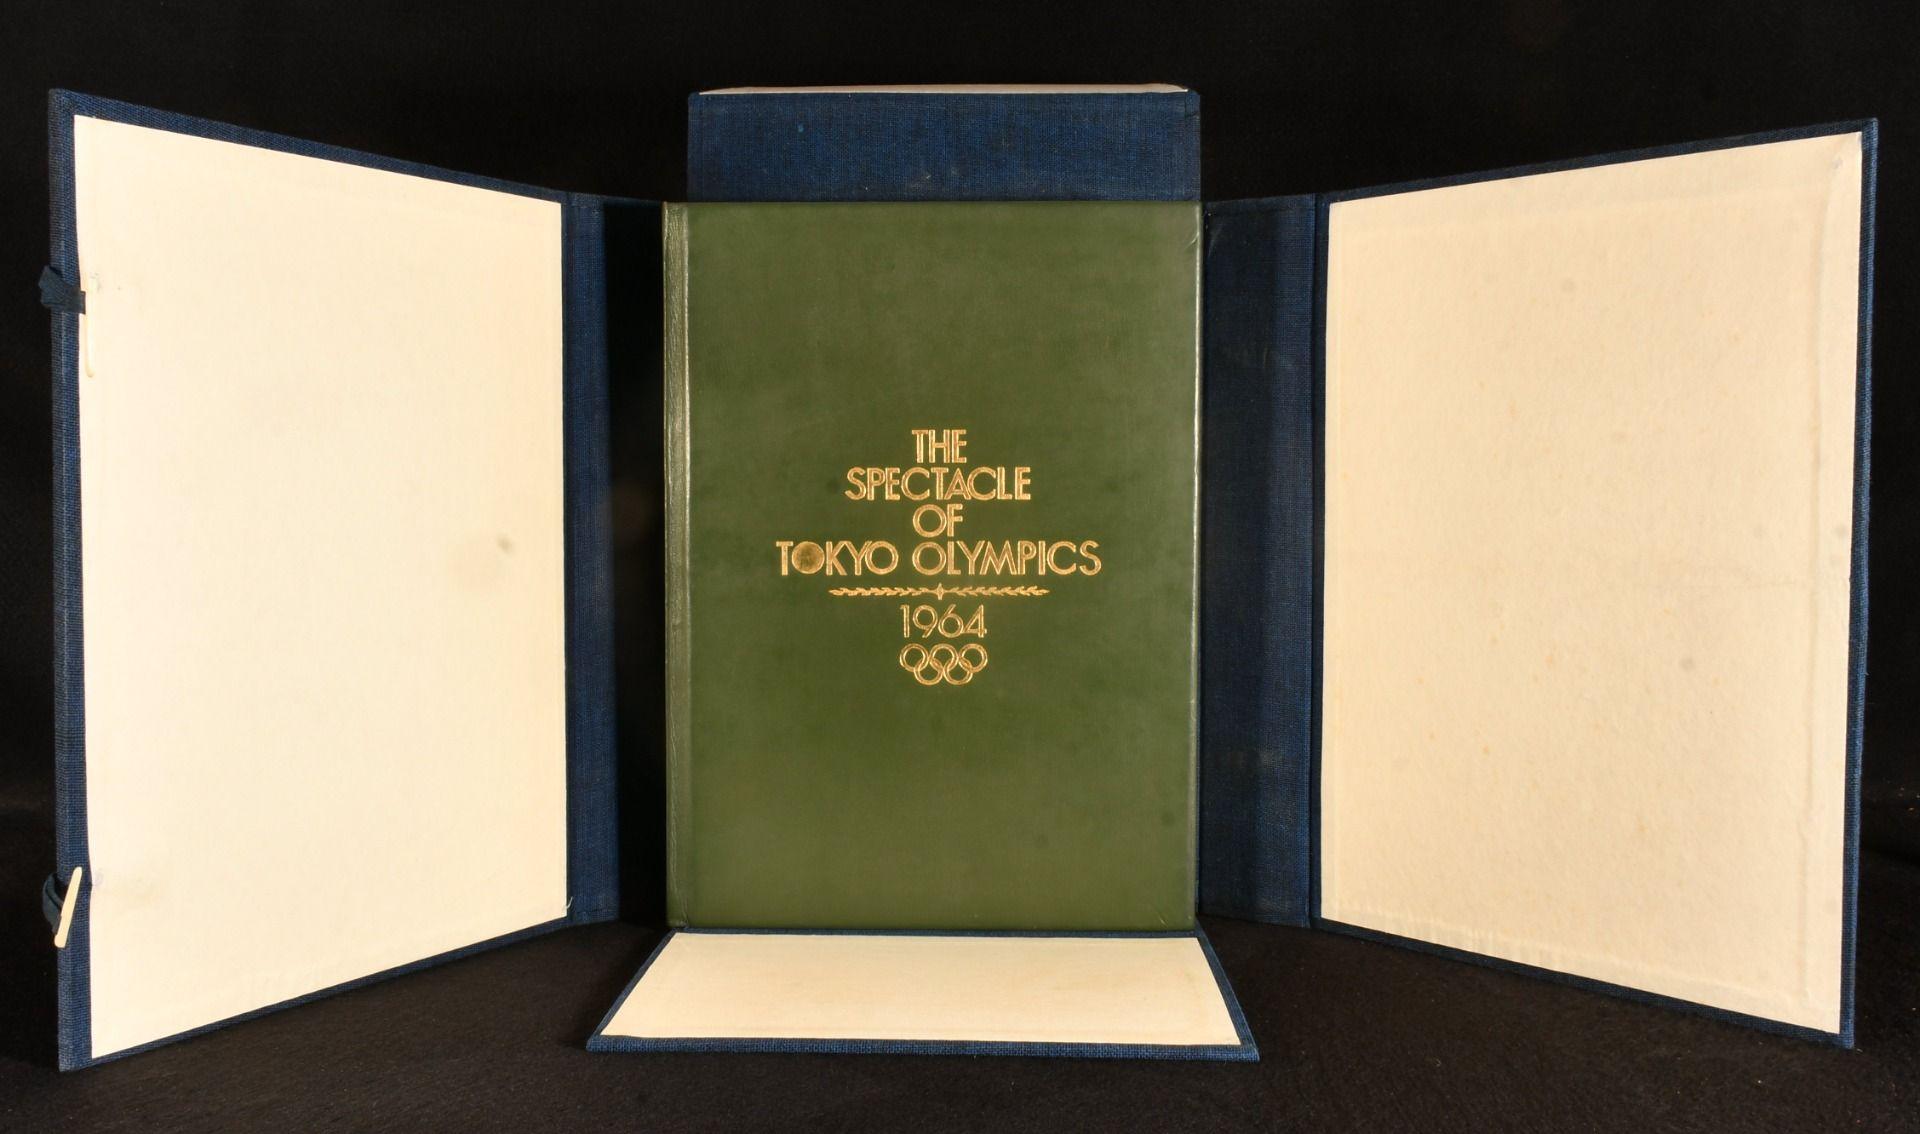 A very scarce beautiful first edition volume commemorating the 1964 Tokyo Summer Olympics, vividly illustrated in colour and monochrome throughout.

A very scarce first edition.

In the original cloth solander box, in a near fine